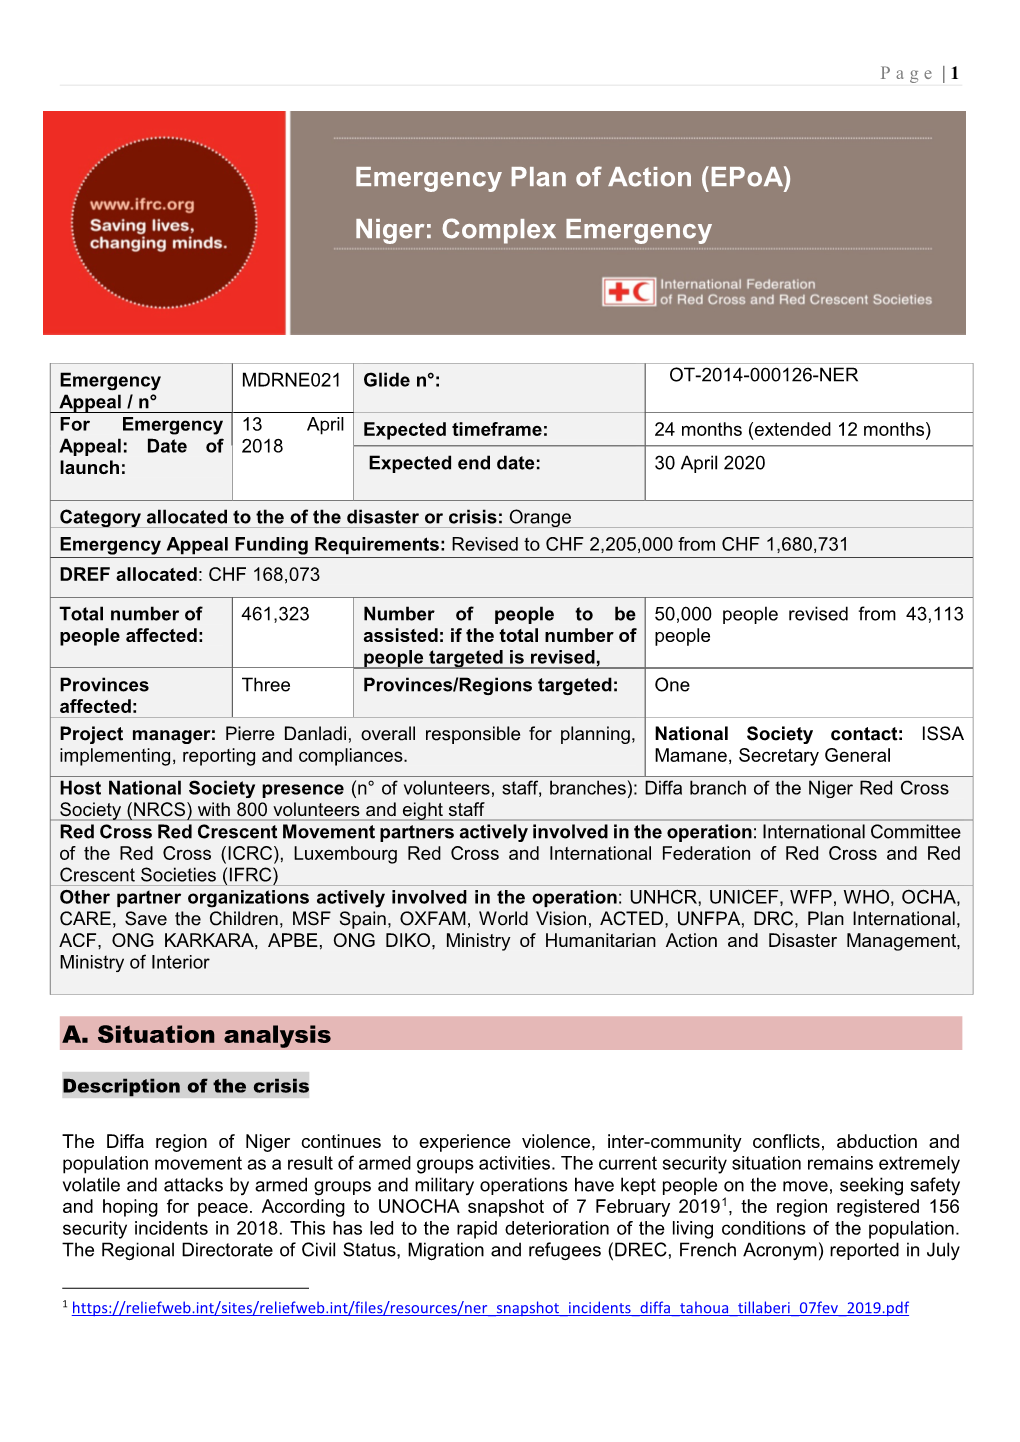 Emergency Plan of Action (Epoa) Niger: Complex Emergency